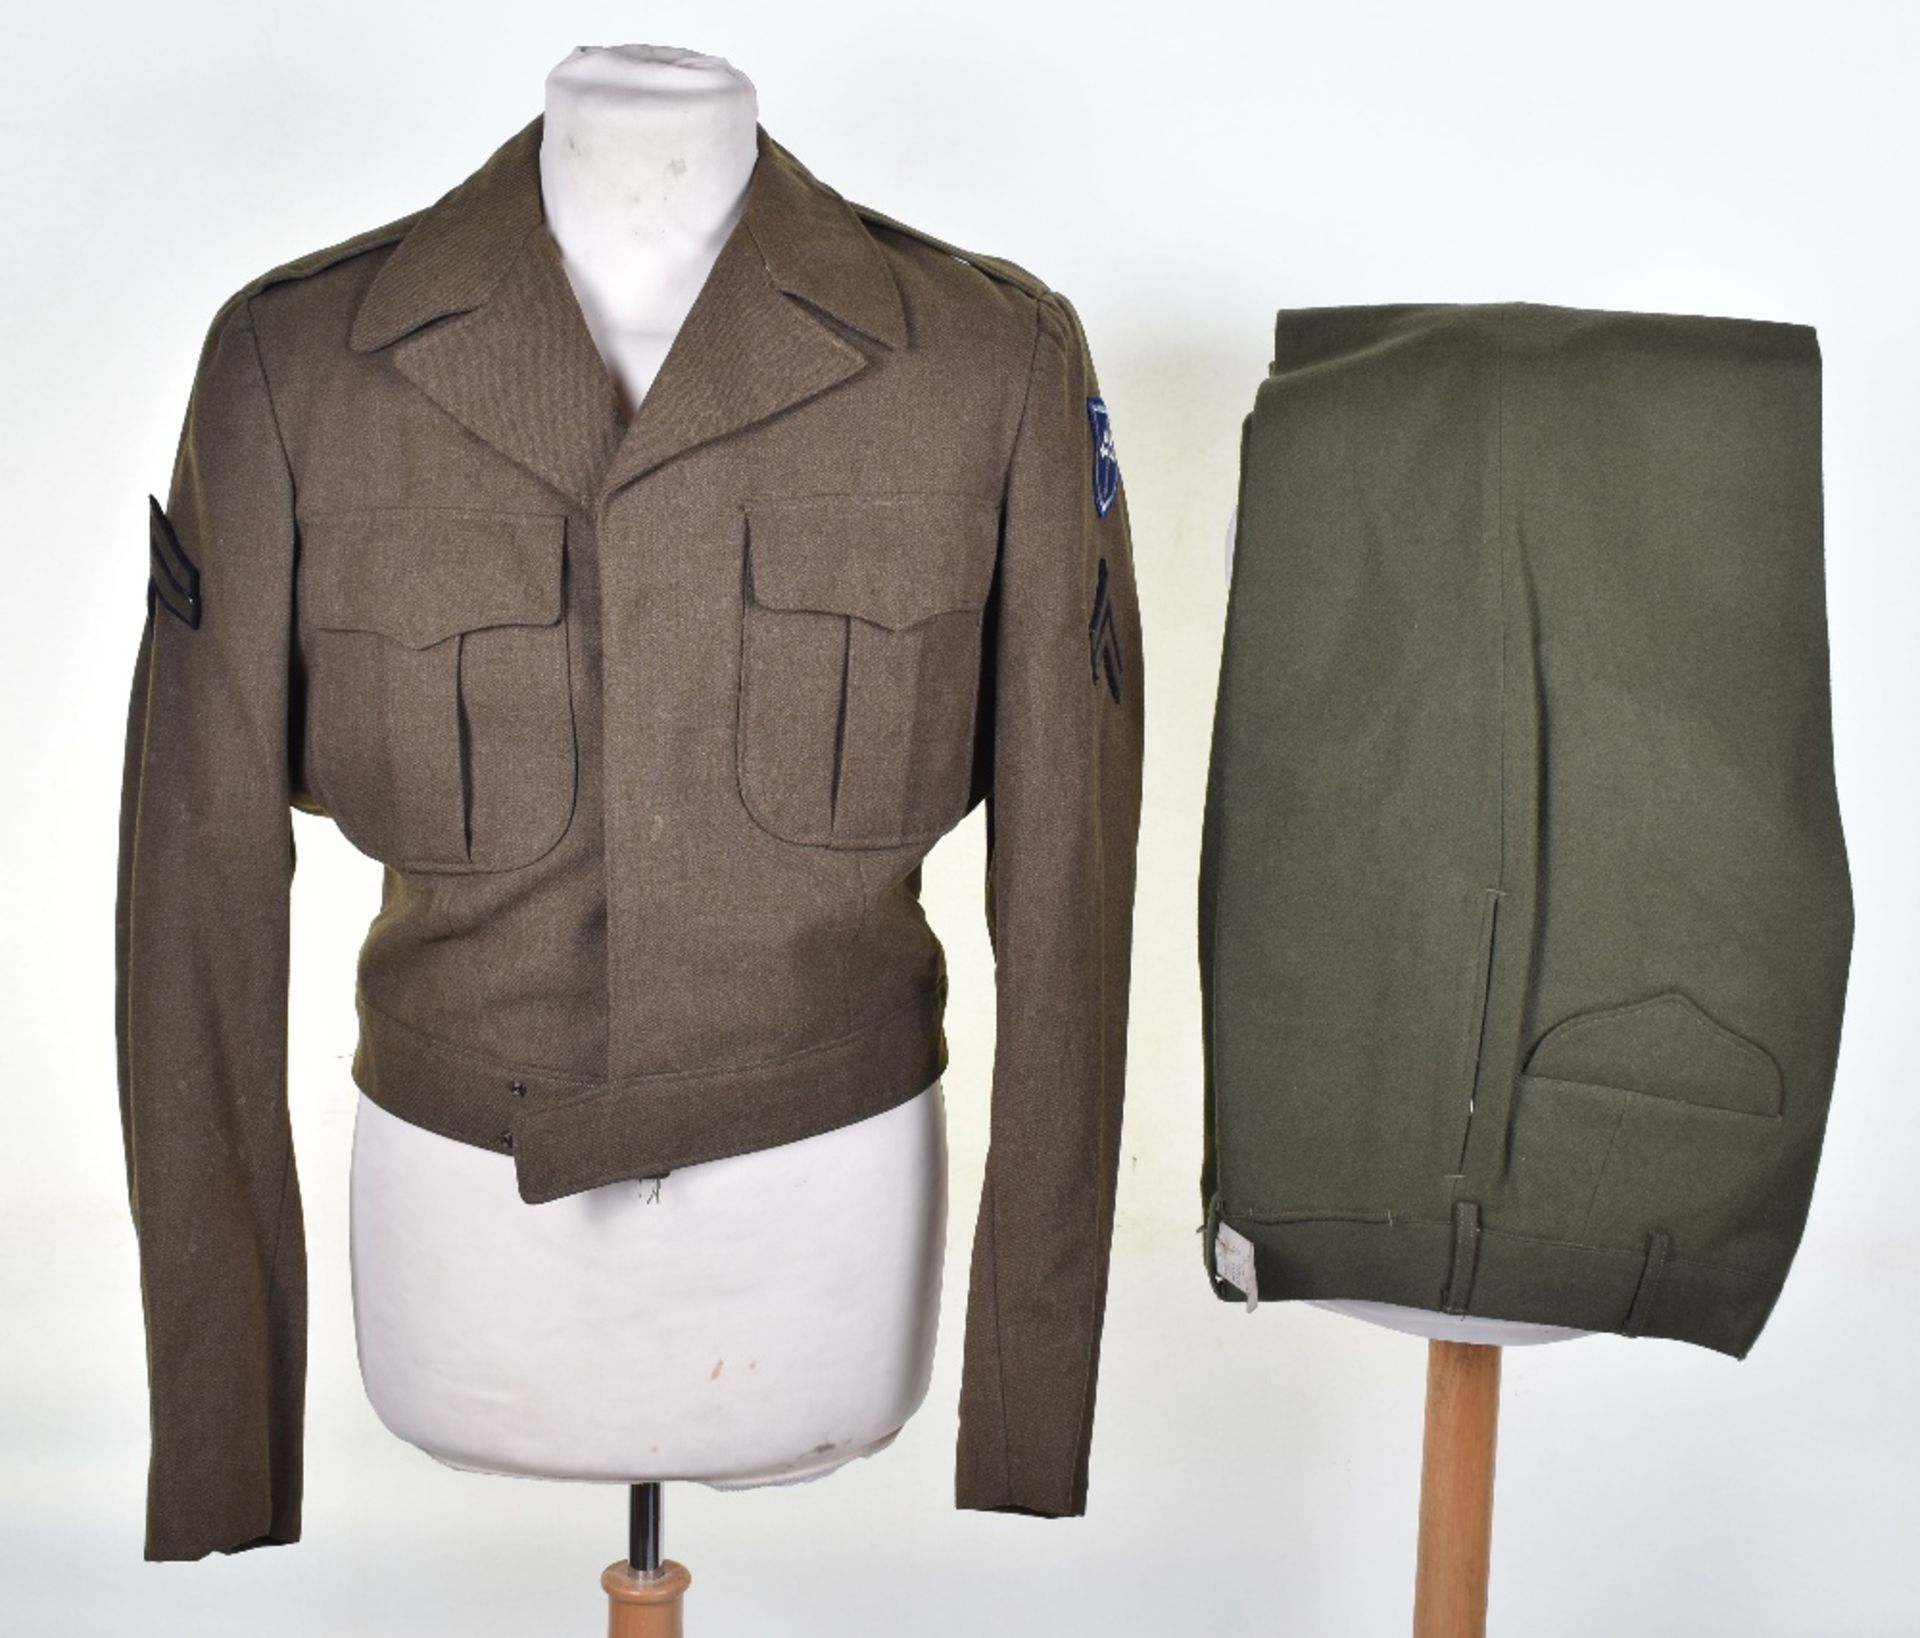 WW2 American Military Ike Jacket and Trousers